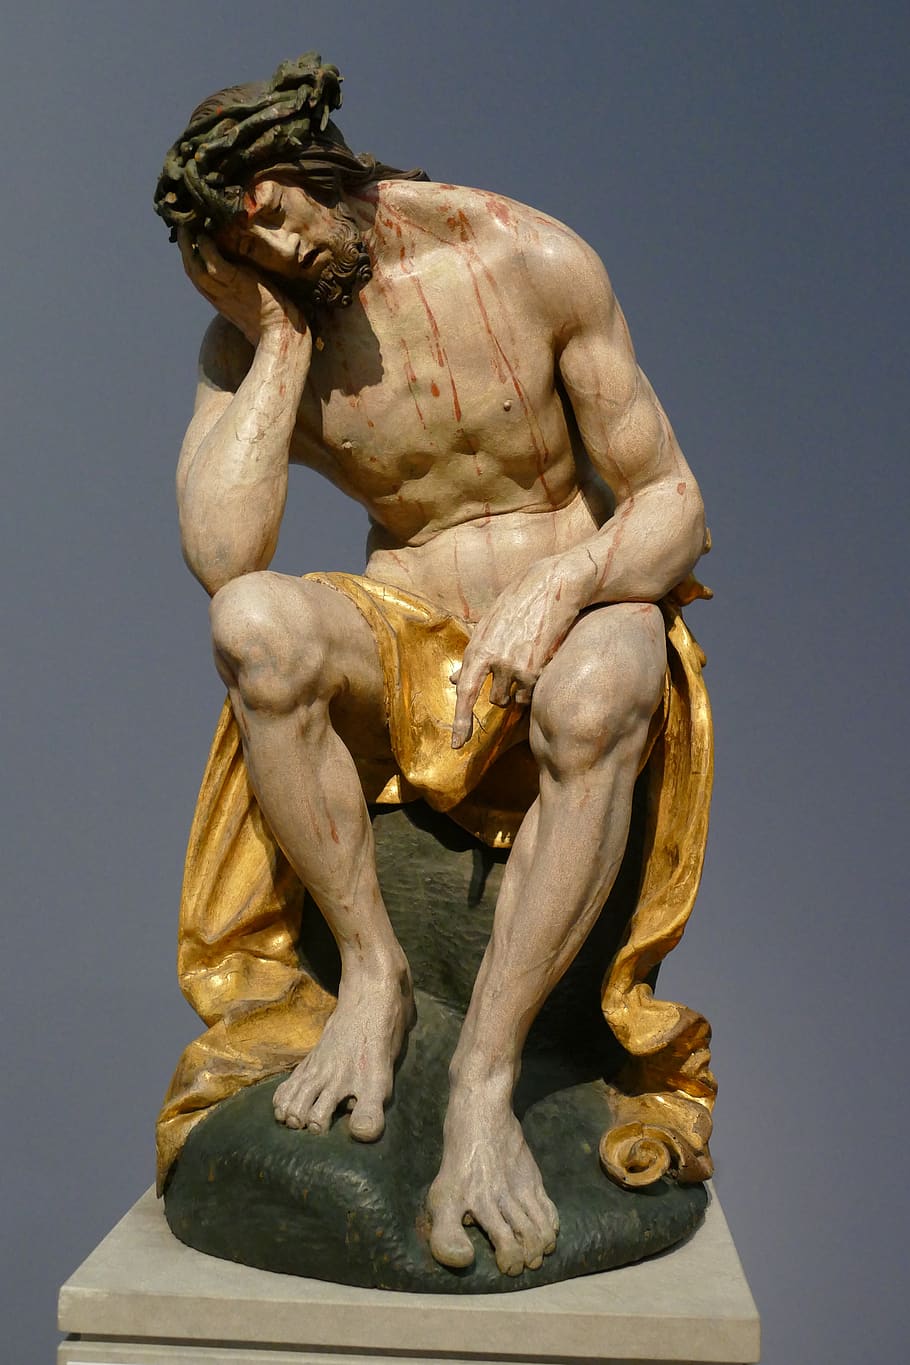 passion, christ, good friday, christianity, religion, suffering, mourning, pain, ordeal, sculpture